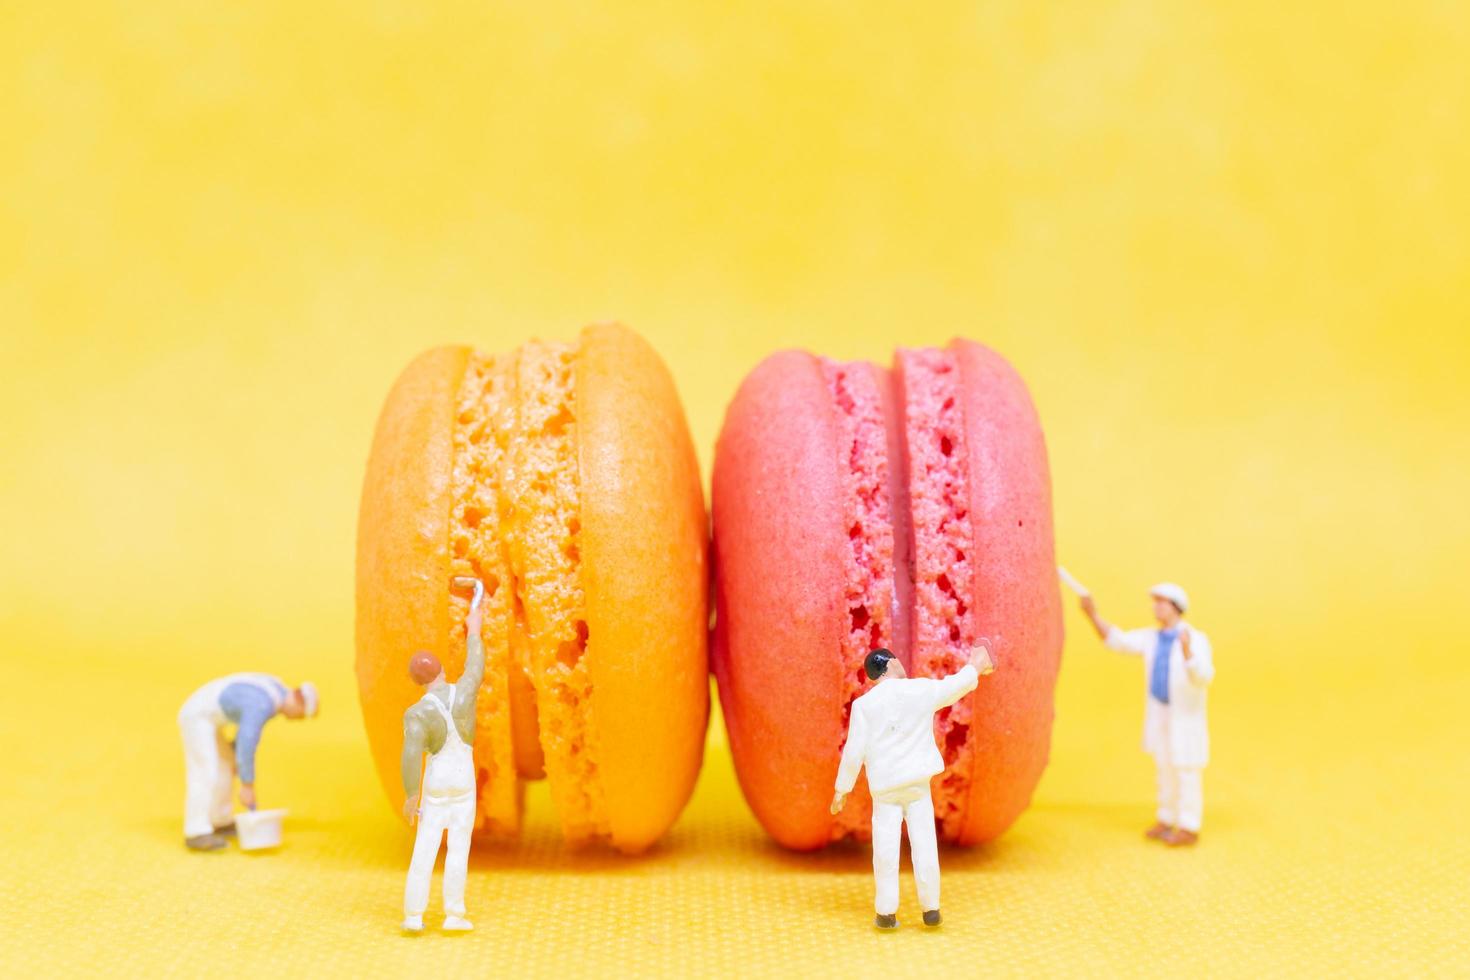 Miniature painters coloring macaroons on a yellow background photo